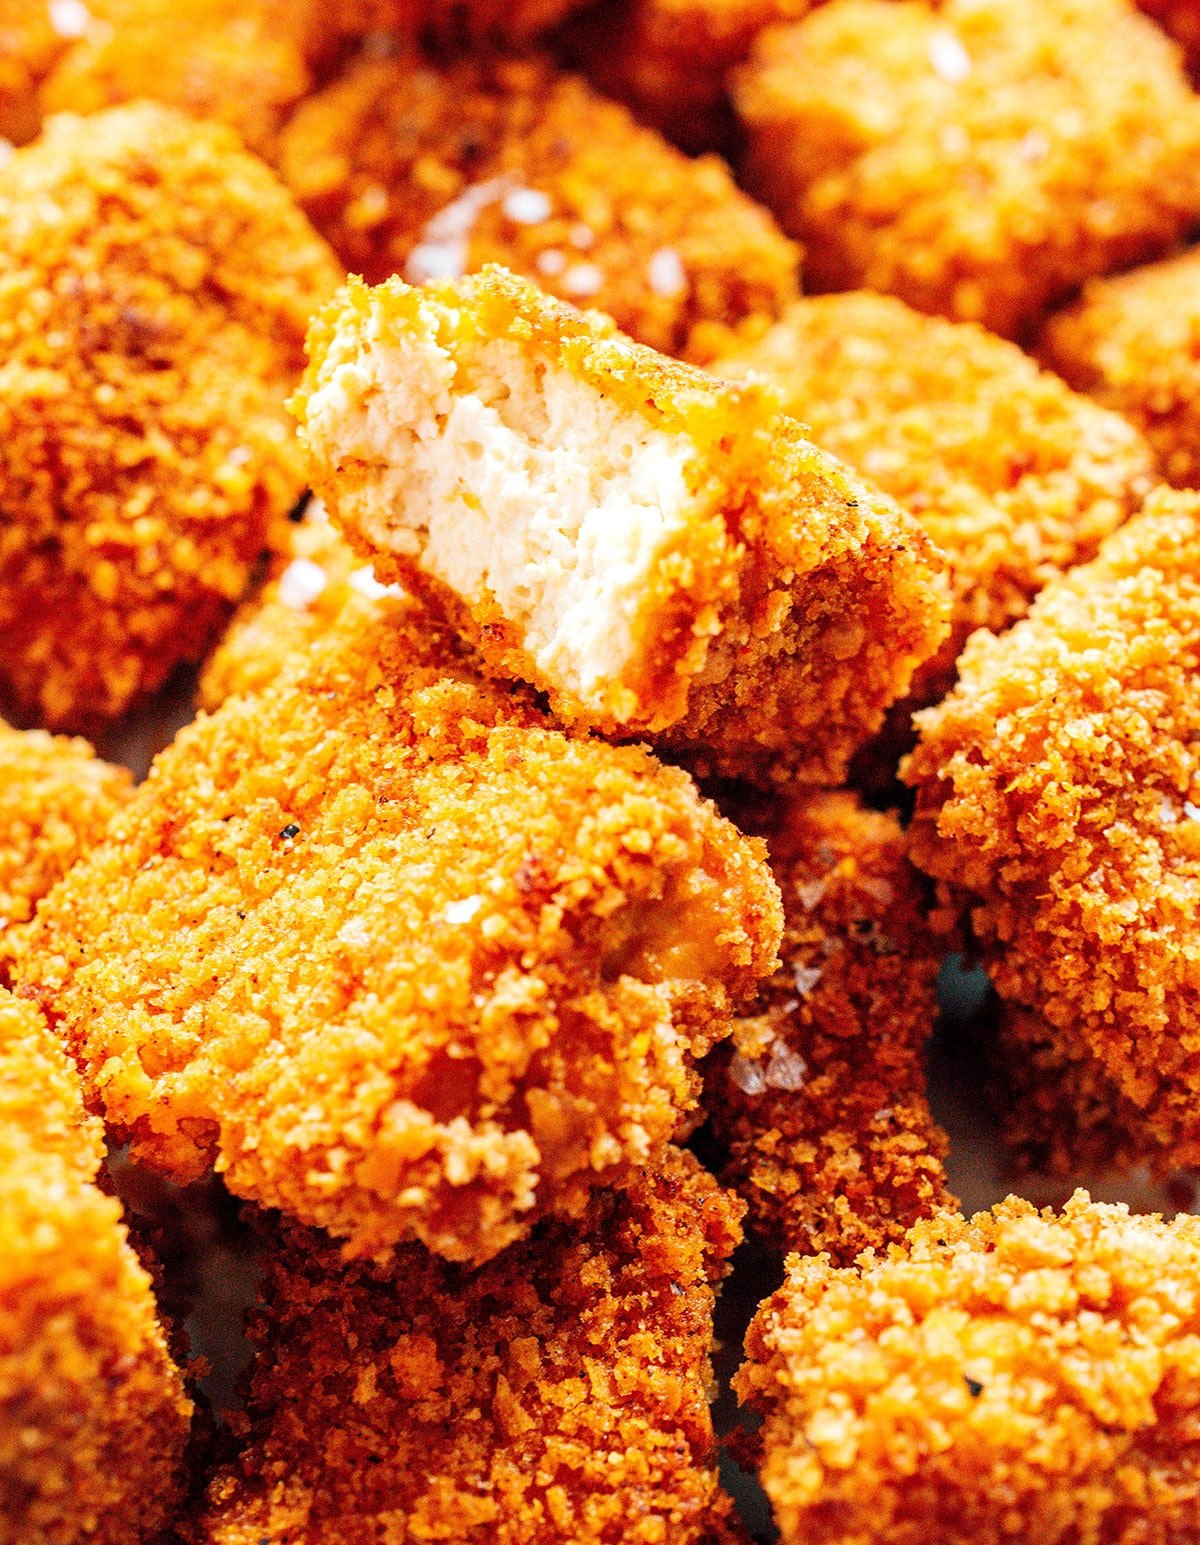 A pile of breaded tofu nuggets with one missing a bite.